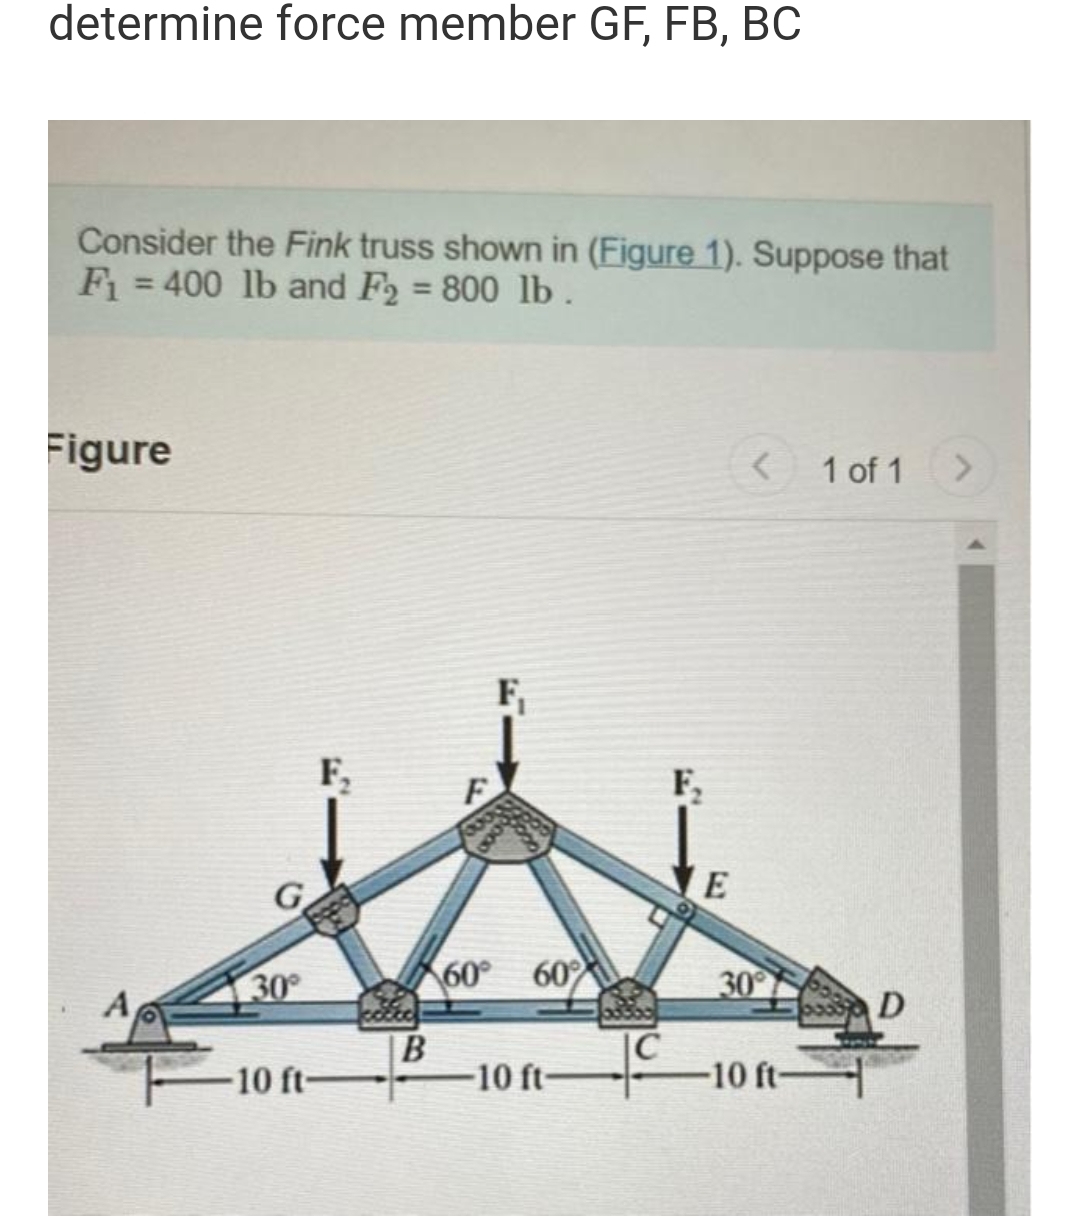 determine force member GF, FB, BC
Consider the Fink truss shown in (Figure 1). Suppose that
F₁ = 400 lb and F2 = 800 lb.
Figure
<
1 of 1
>
F
60° 60%
-10 ft-
A
30°
-10 ft-
F₂
B
F₂
E
30°
-10 ft-
D